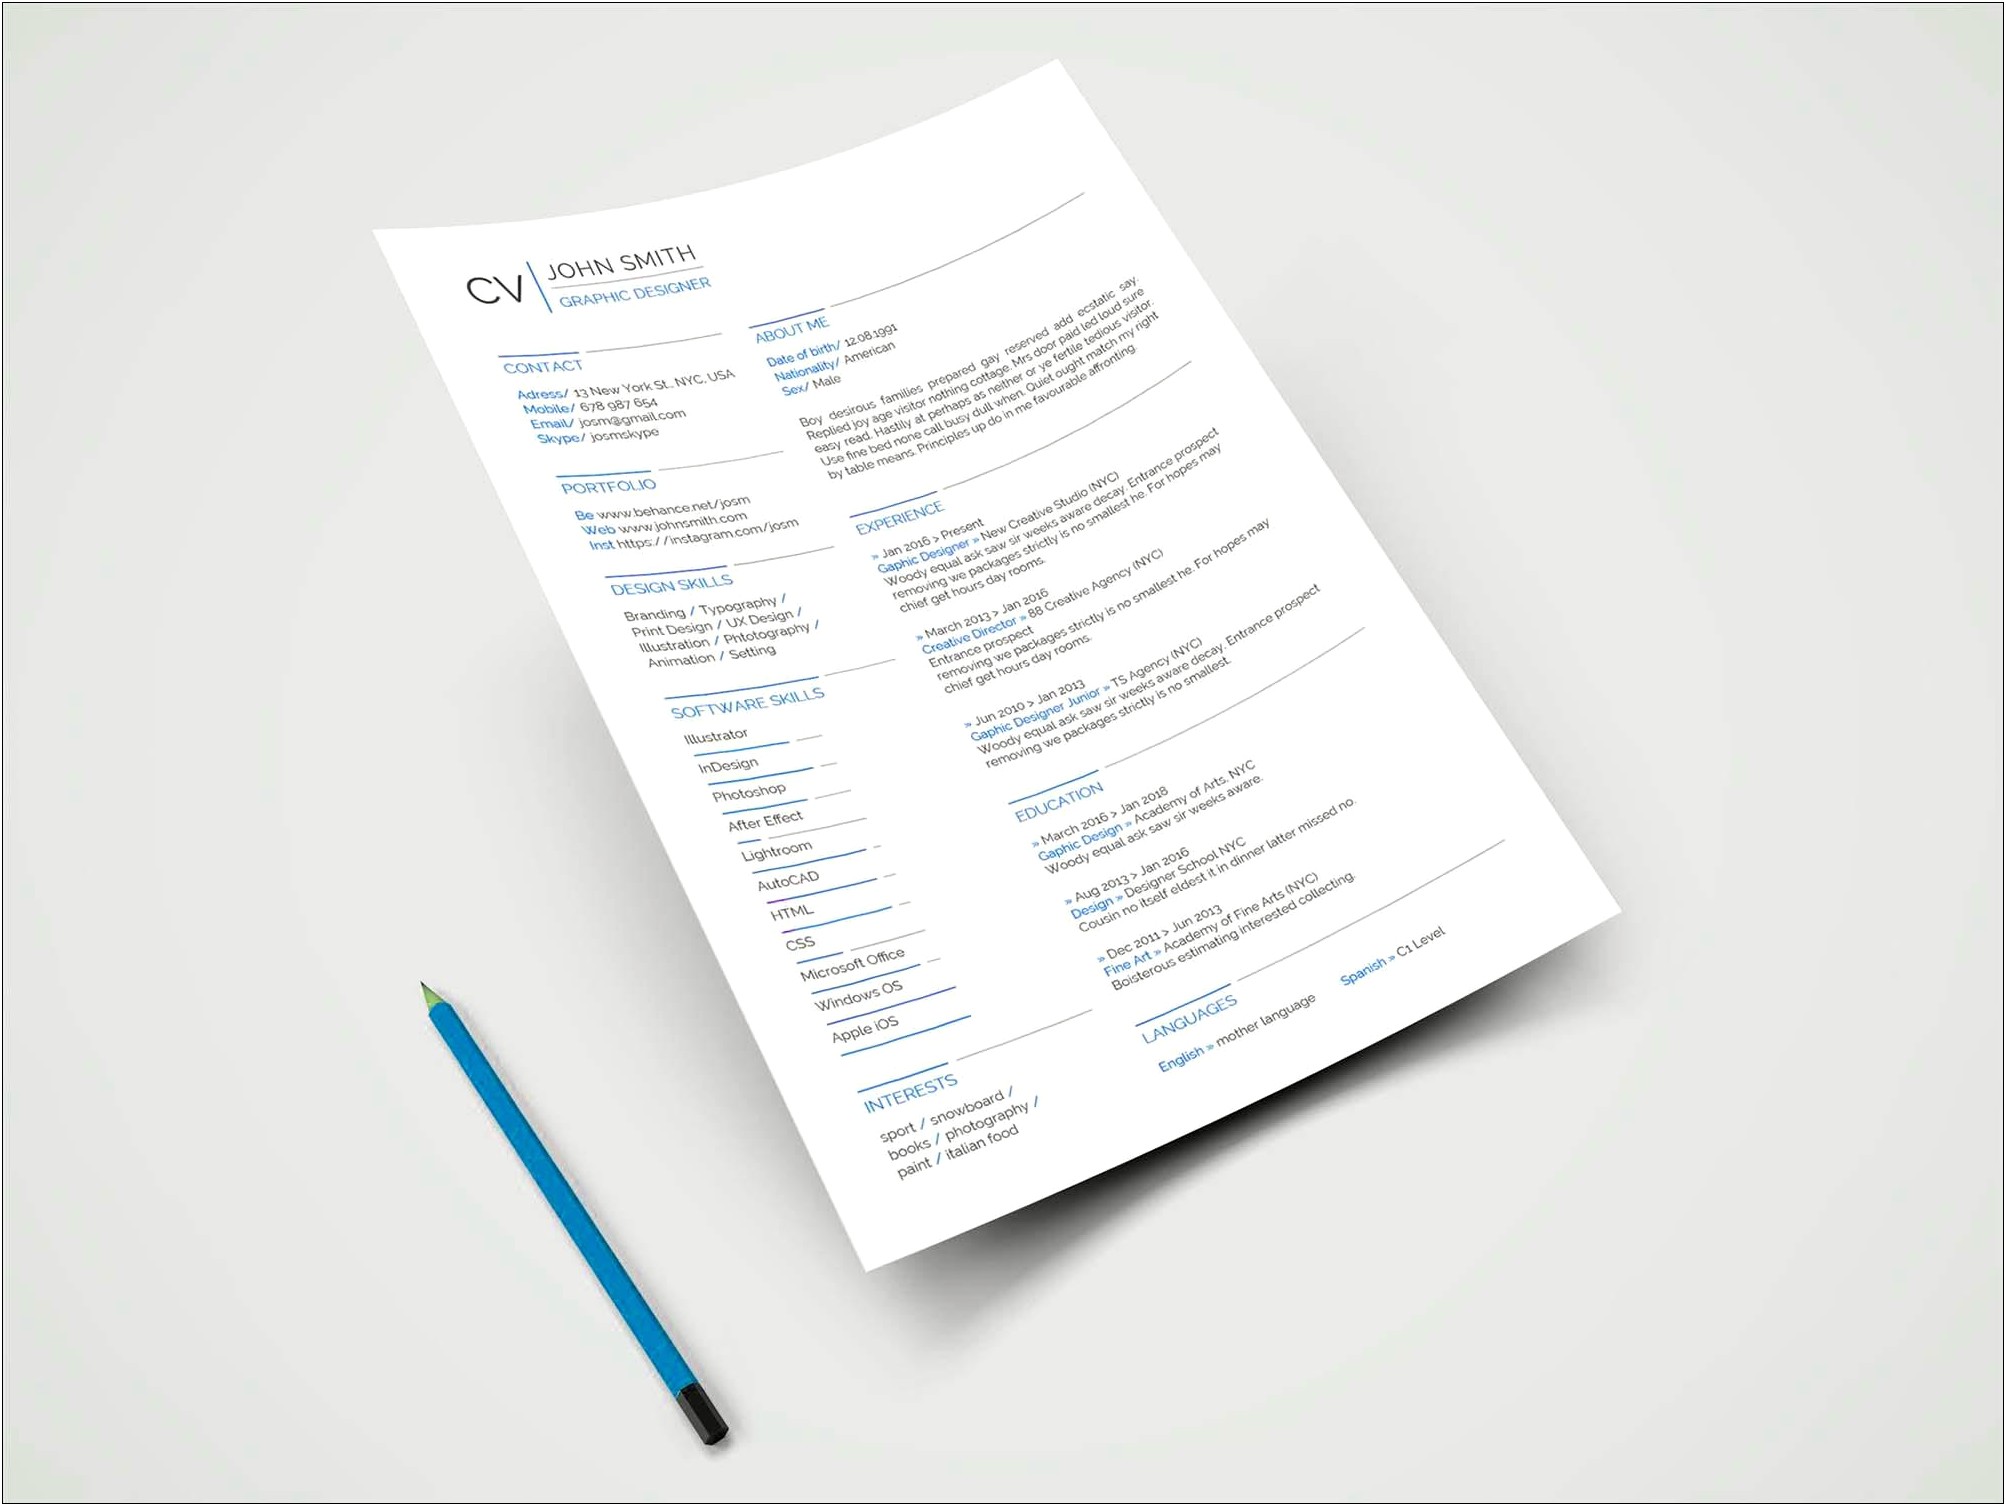 About Me Free Resume Templates 2019